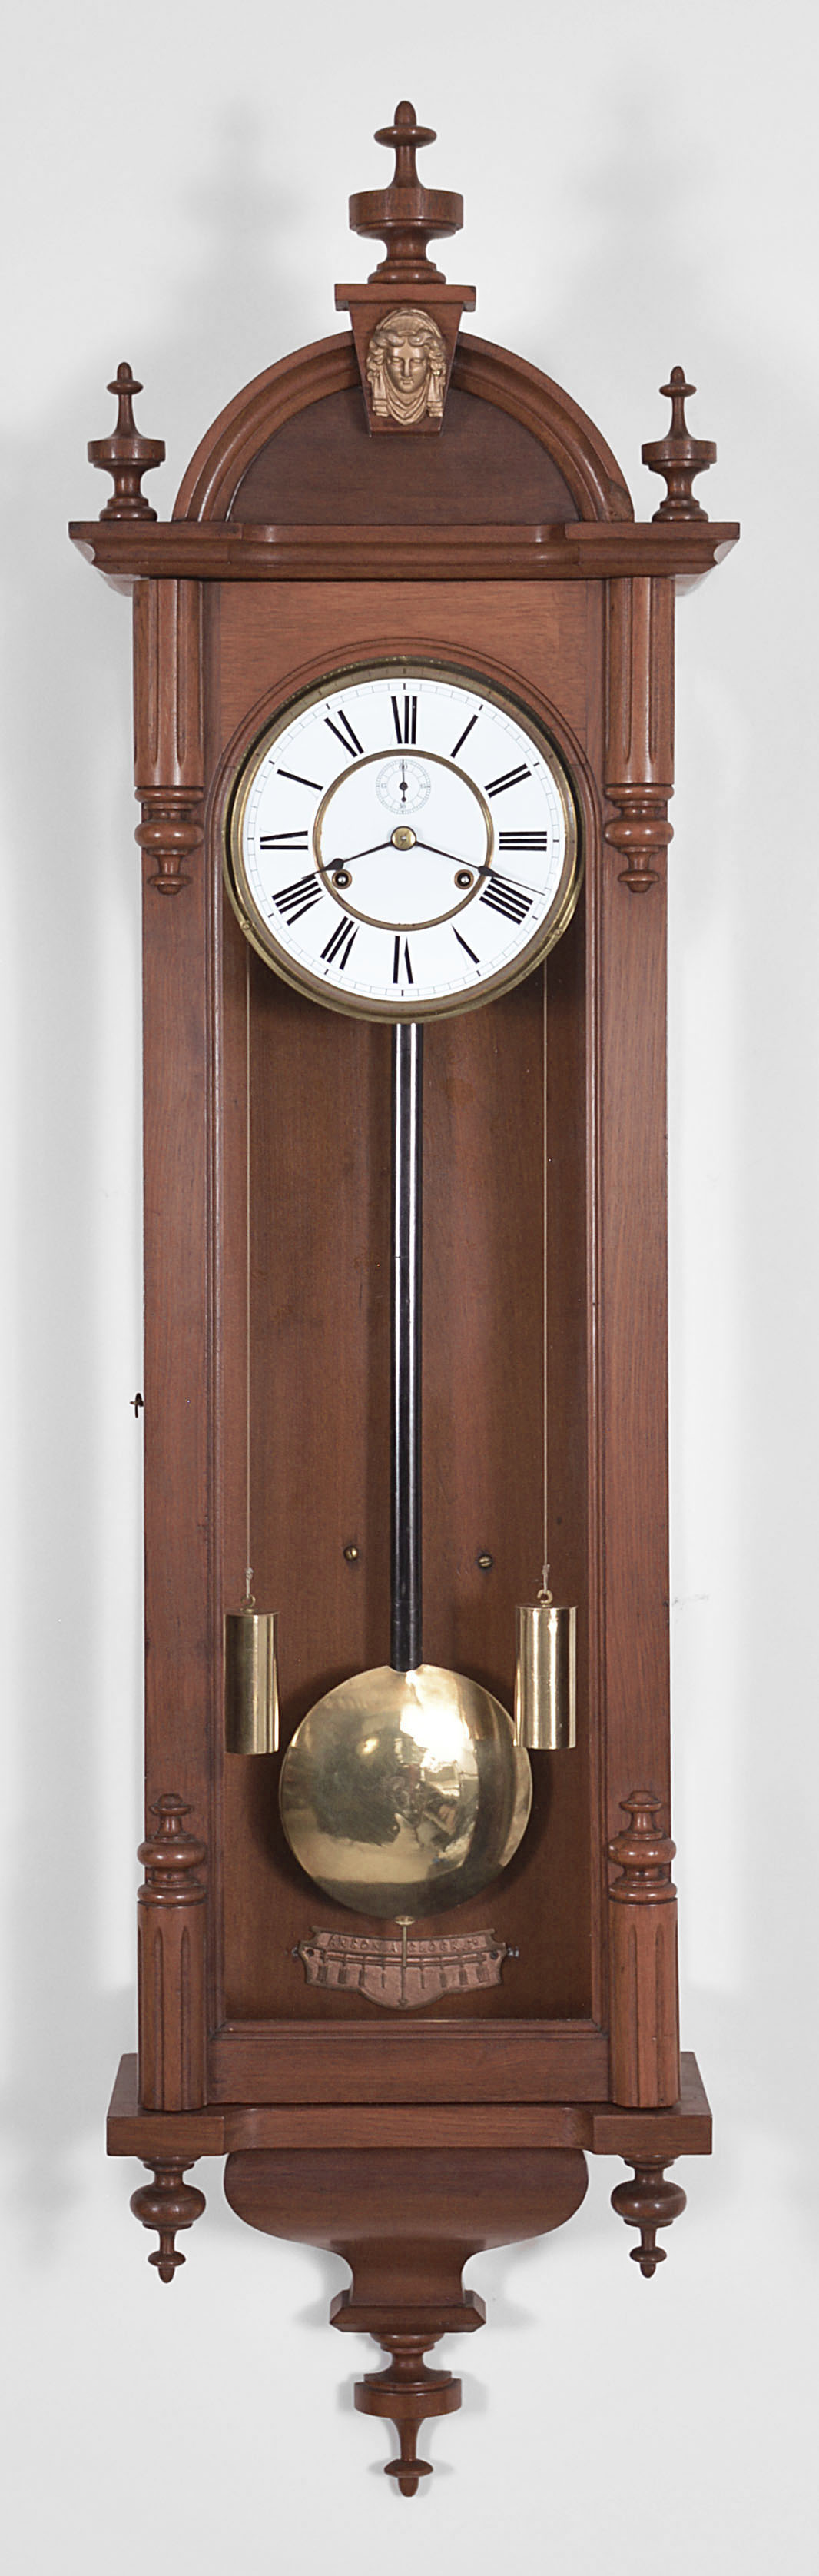 For Cuckoo Clock Pendulum Small for One 1 Day Movements 2 Maple Leaf German 30 Hour Verits supplier for home /& garden